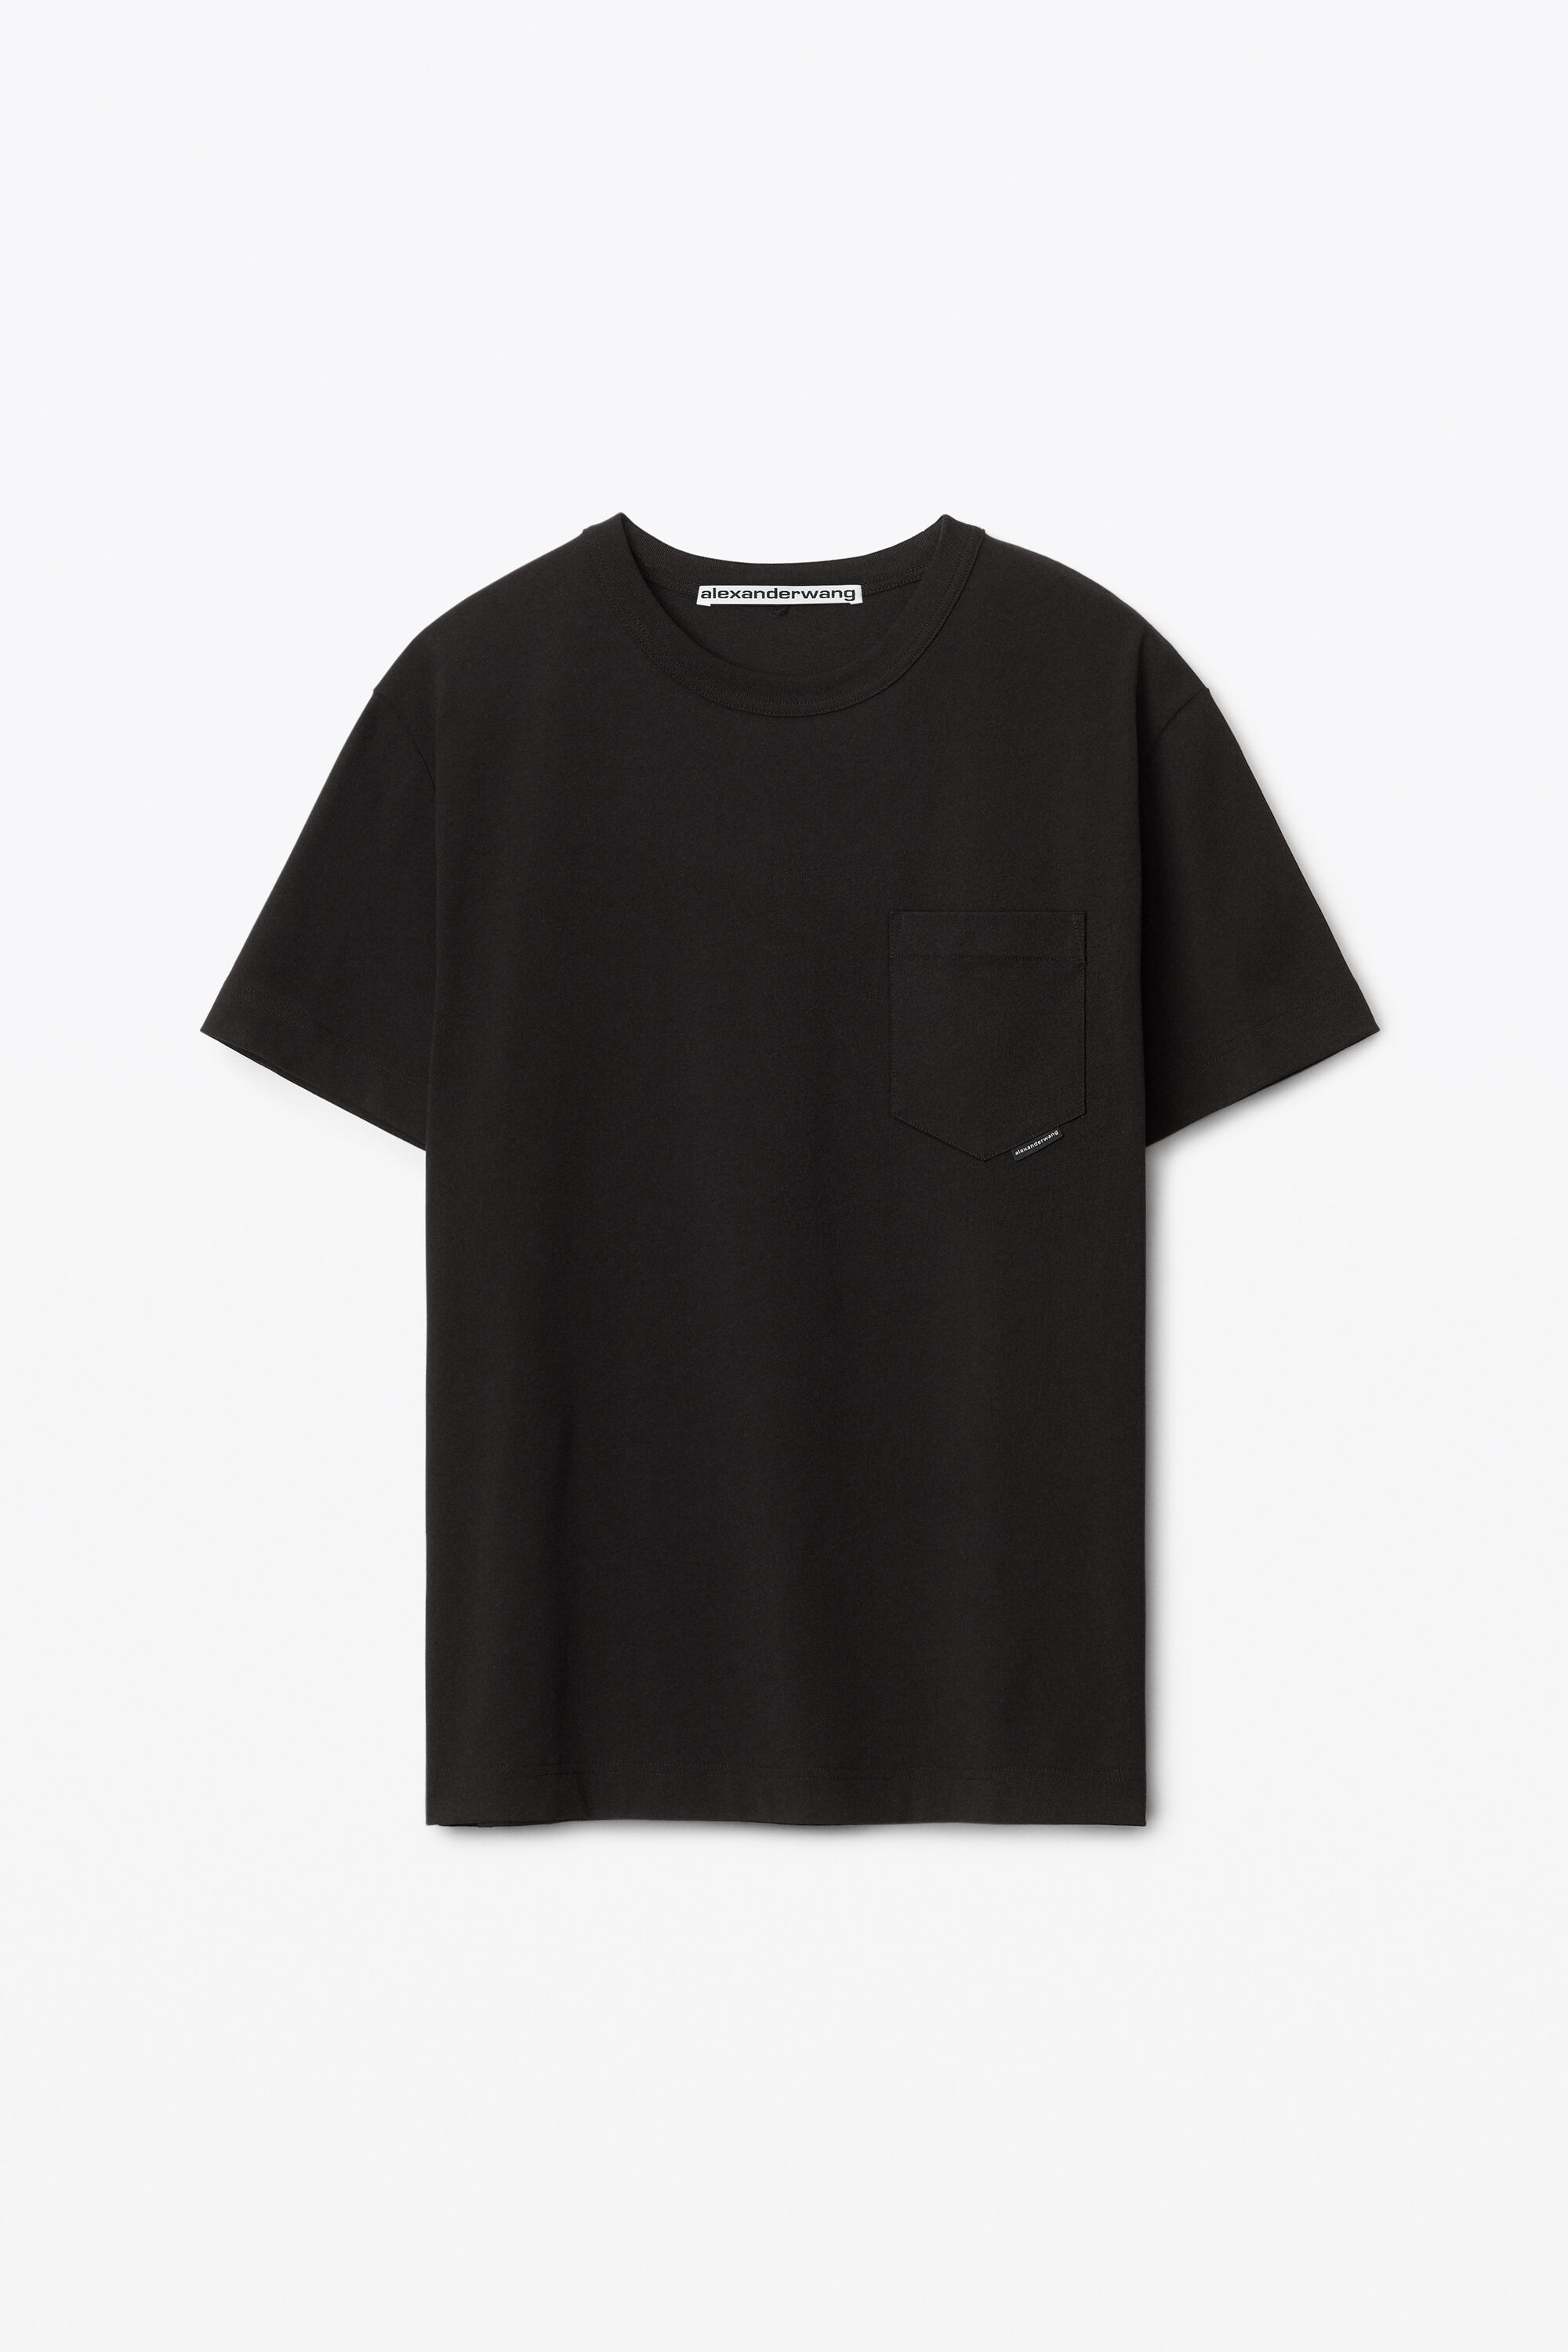 Unisex Clothing, Shoes & Accessories | alexanderwang® US Official Site